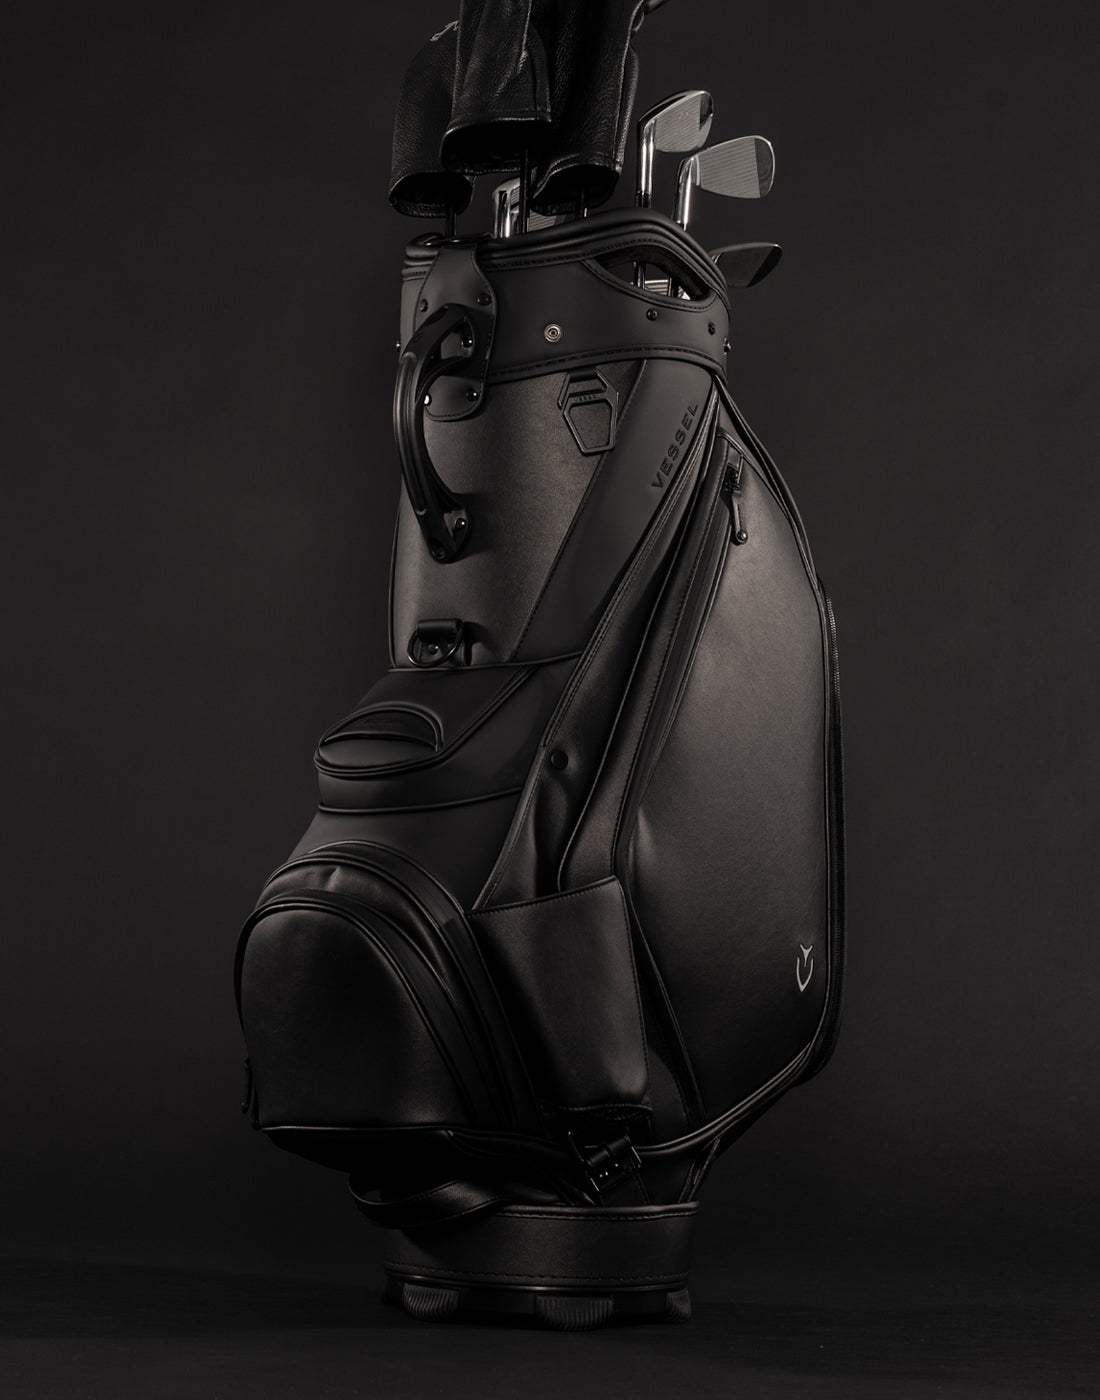 Black golf staff bag filled with golf clubs propped upright in black studio